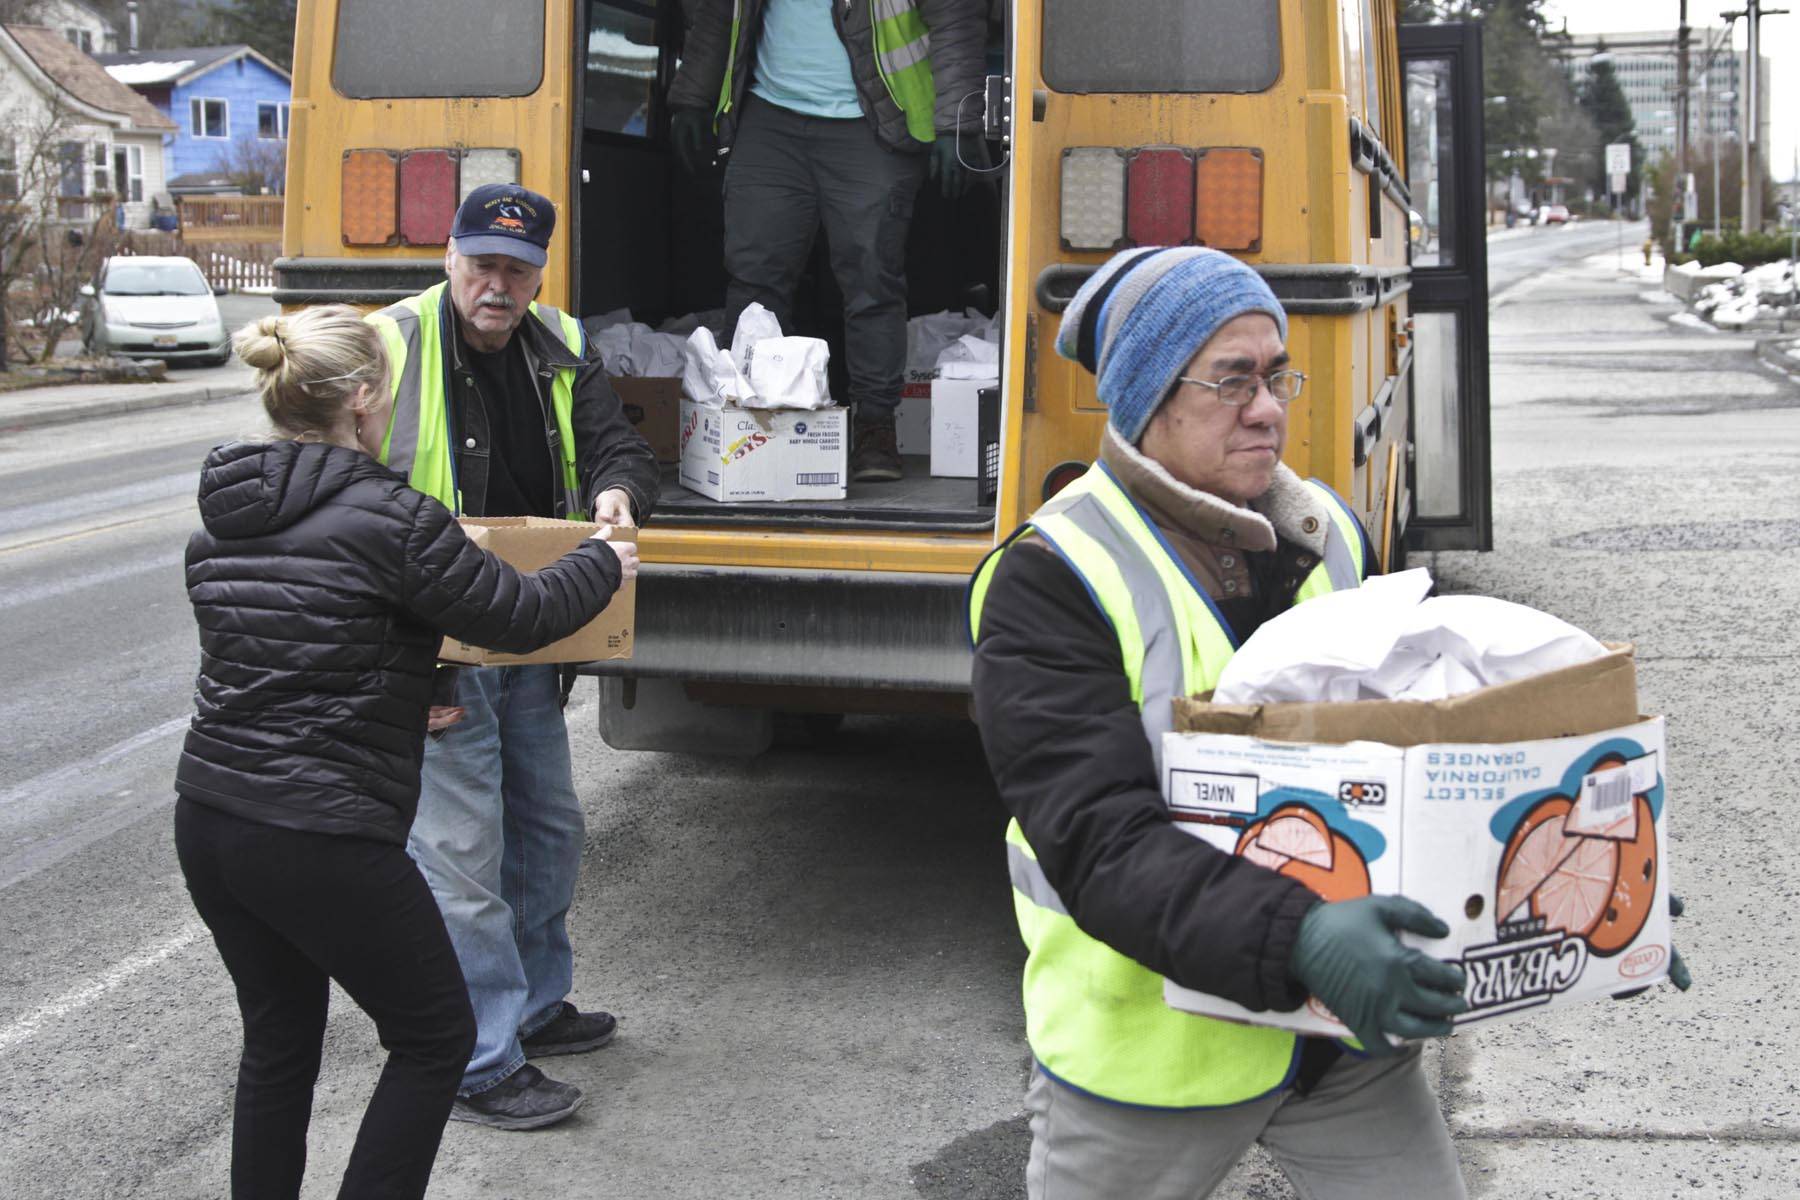 First Student employees and Juneau School District food services supervisor Adrianne Schwartz, left, carry student meals off the bus they’re being distributed from near Juneau-Douglas High School:Yadaa.at Kalé, March 16, 2020. The school program is ending Friday, but a United States Department of Agriculture program is expected to begin providing lunches Monday. (Michael S. Lockett | Juneau Empire File)